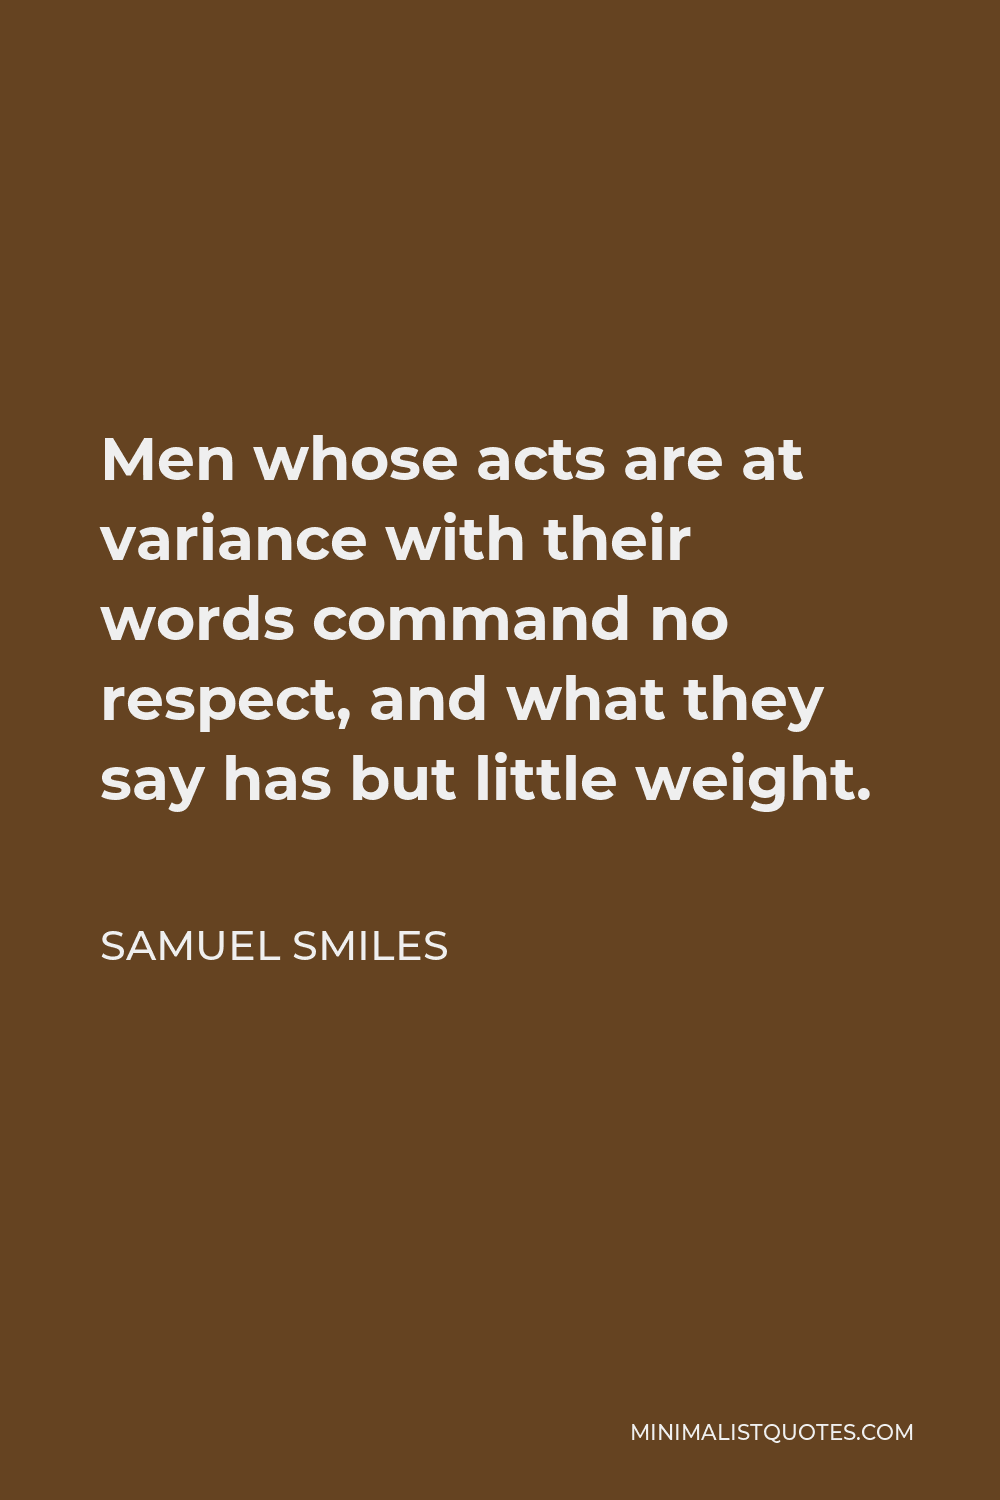 Samuel Smiles Quote - Men whose acts are at variance with their words command no respect, and what they say has but little weight.